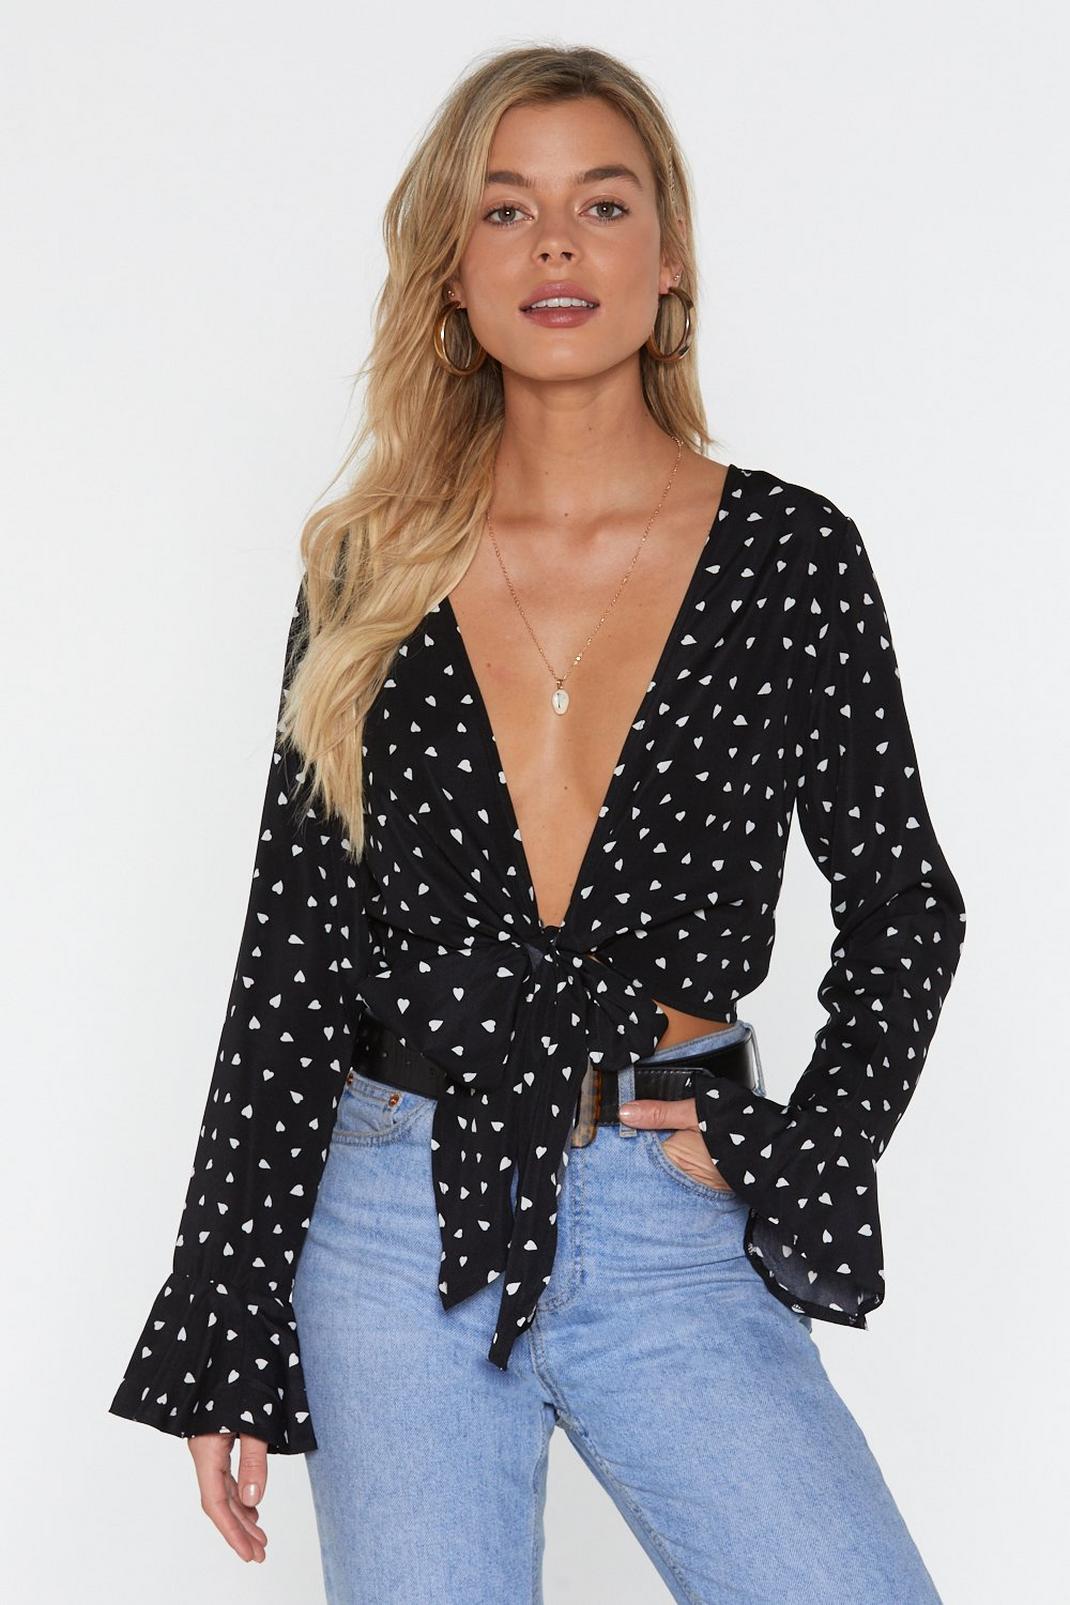 Tearin' Up My Heart Cropped Tie Top | Nasty Gal